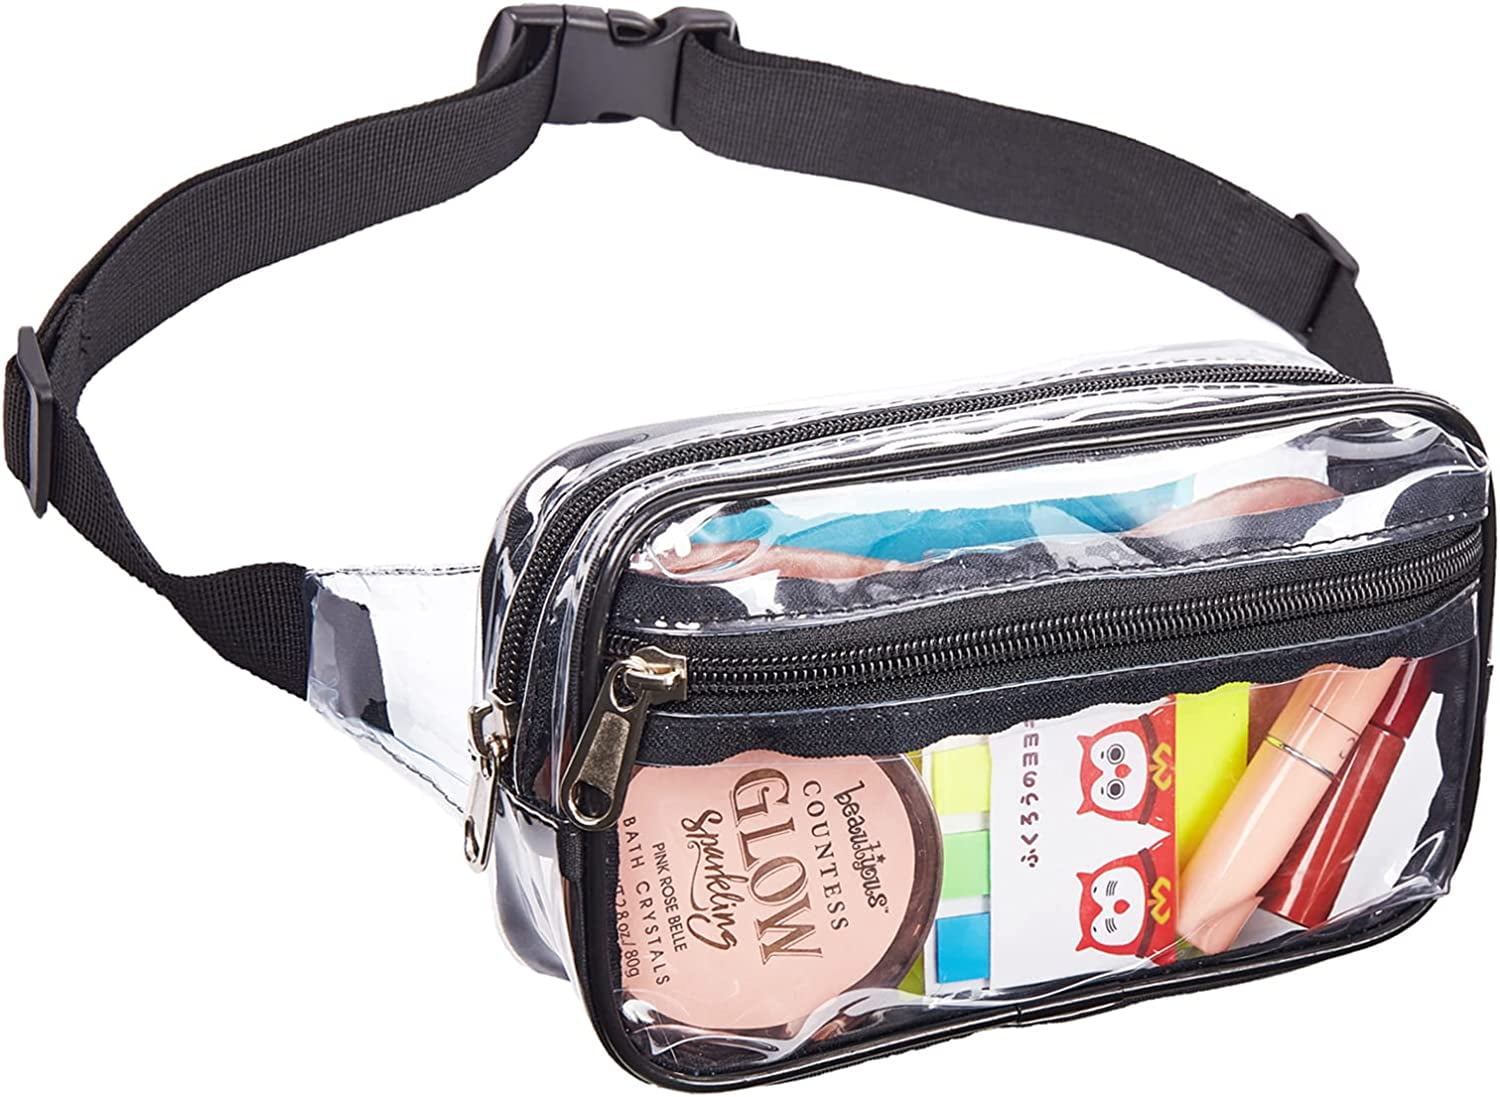 A music festival sex kit that fits in your fanny pack